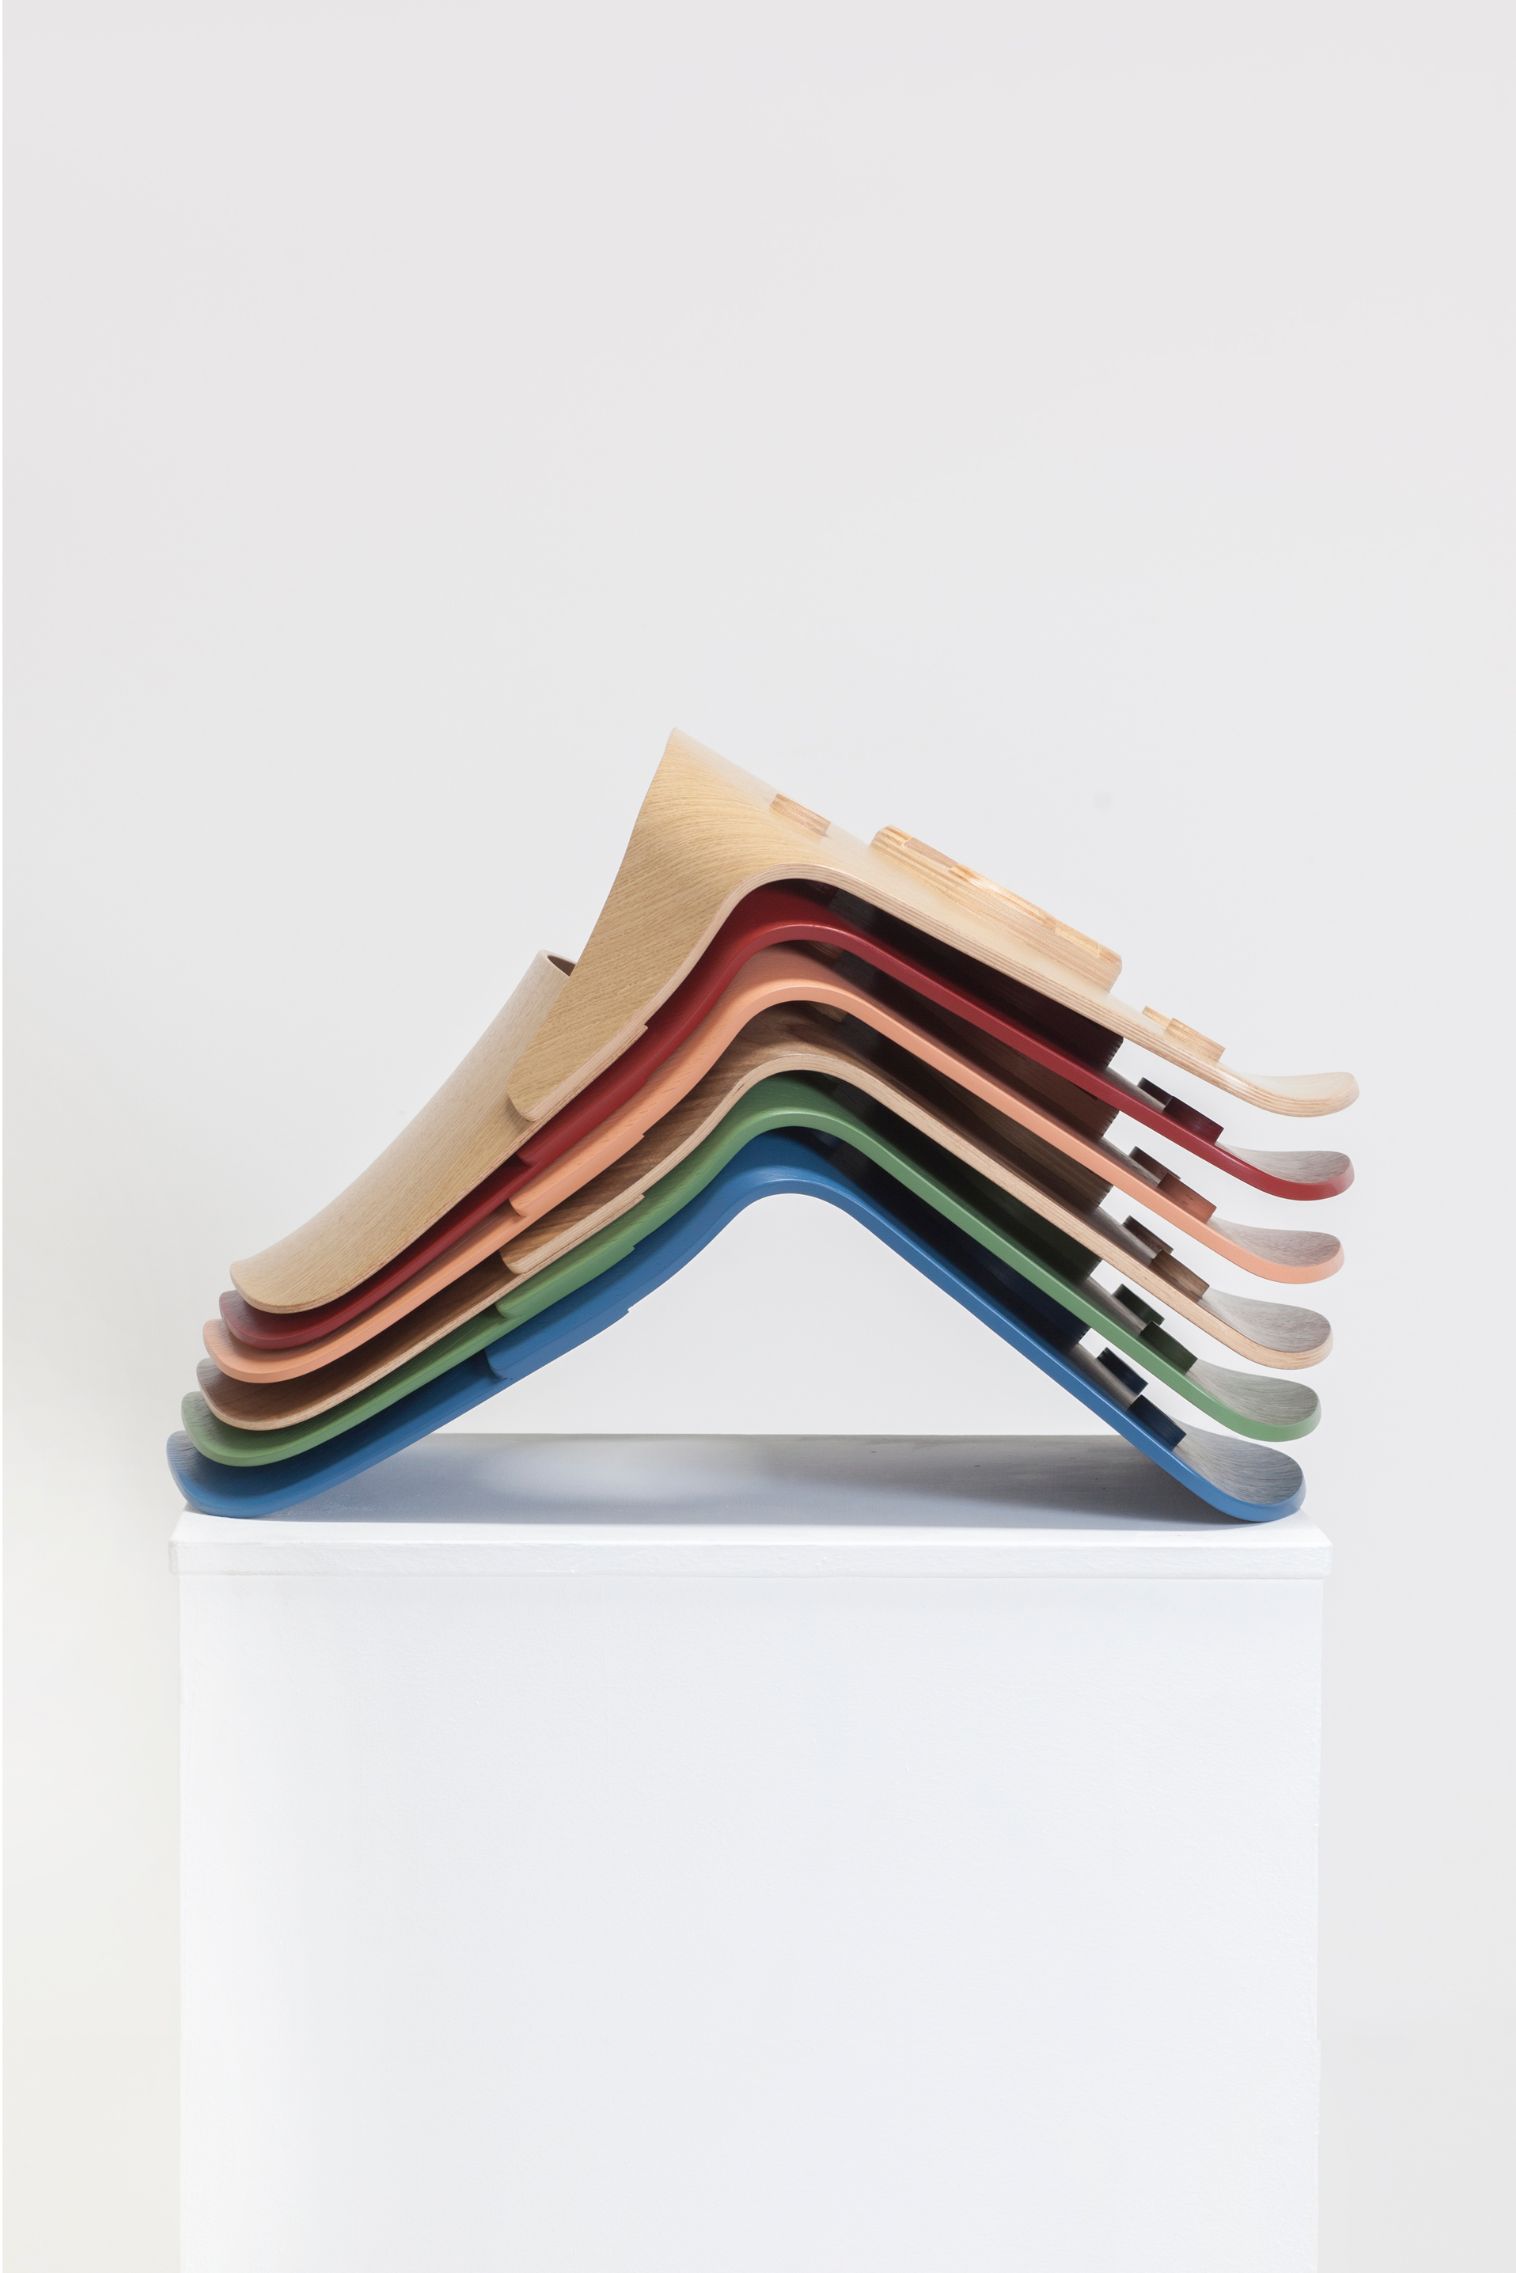 Colourful molded plywood chair shells packed in an aesthetic way on a white peddestal